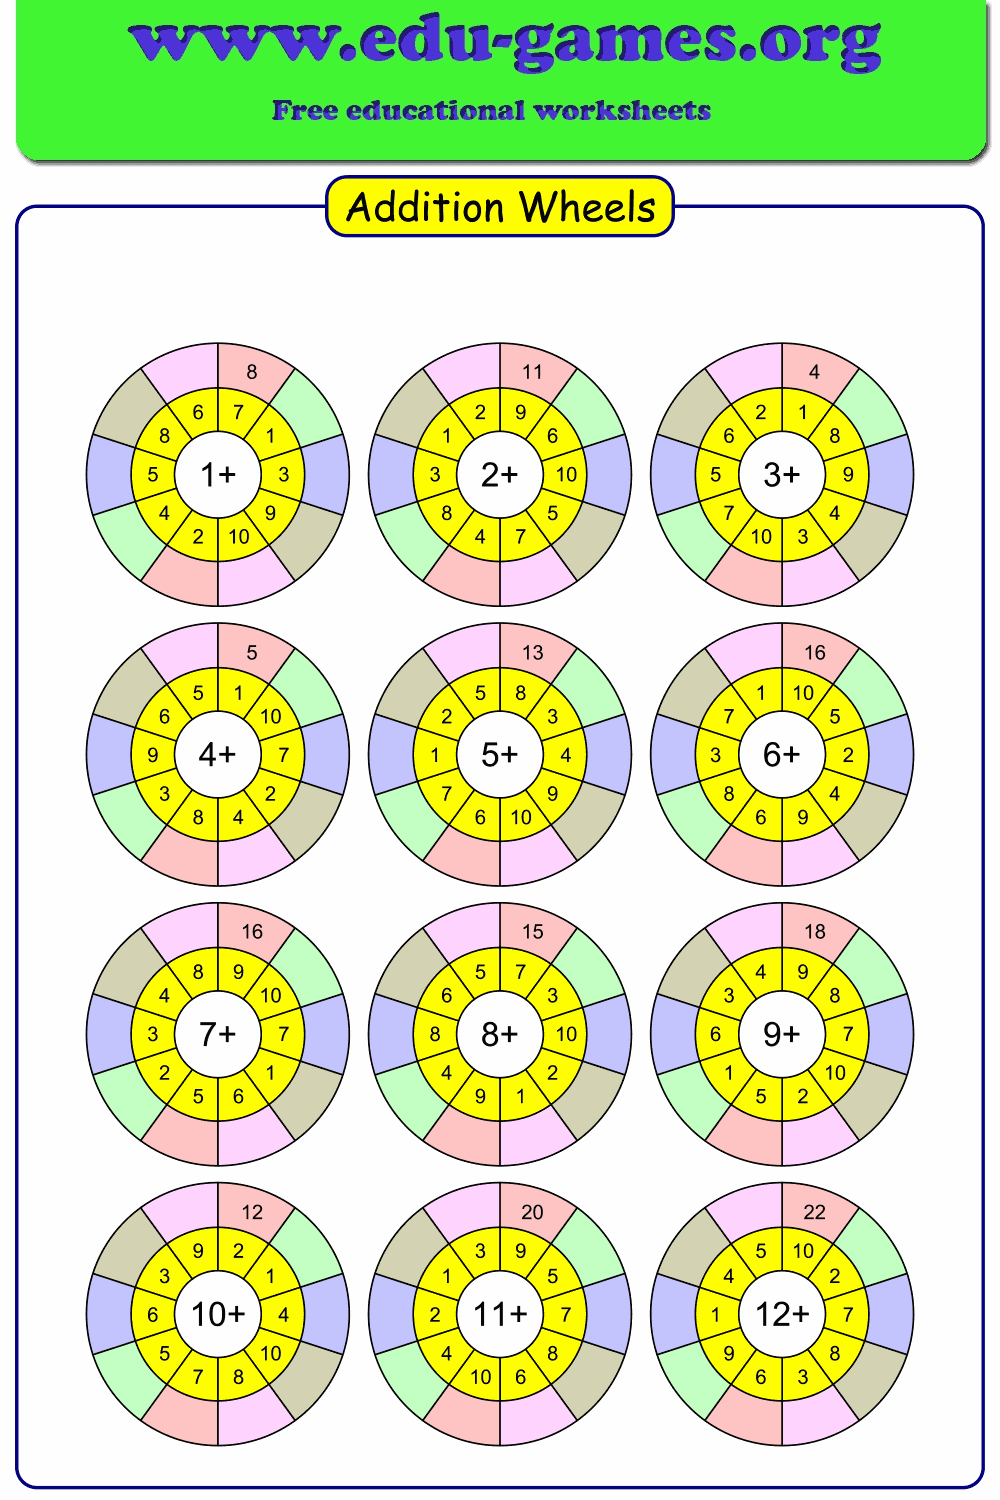 addition-wheels-png